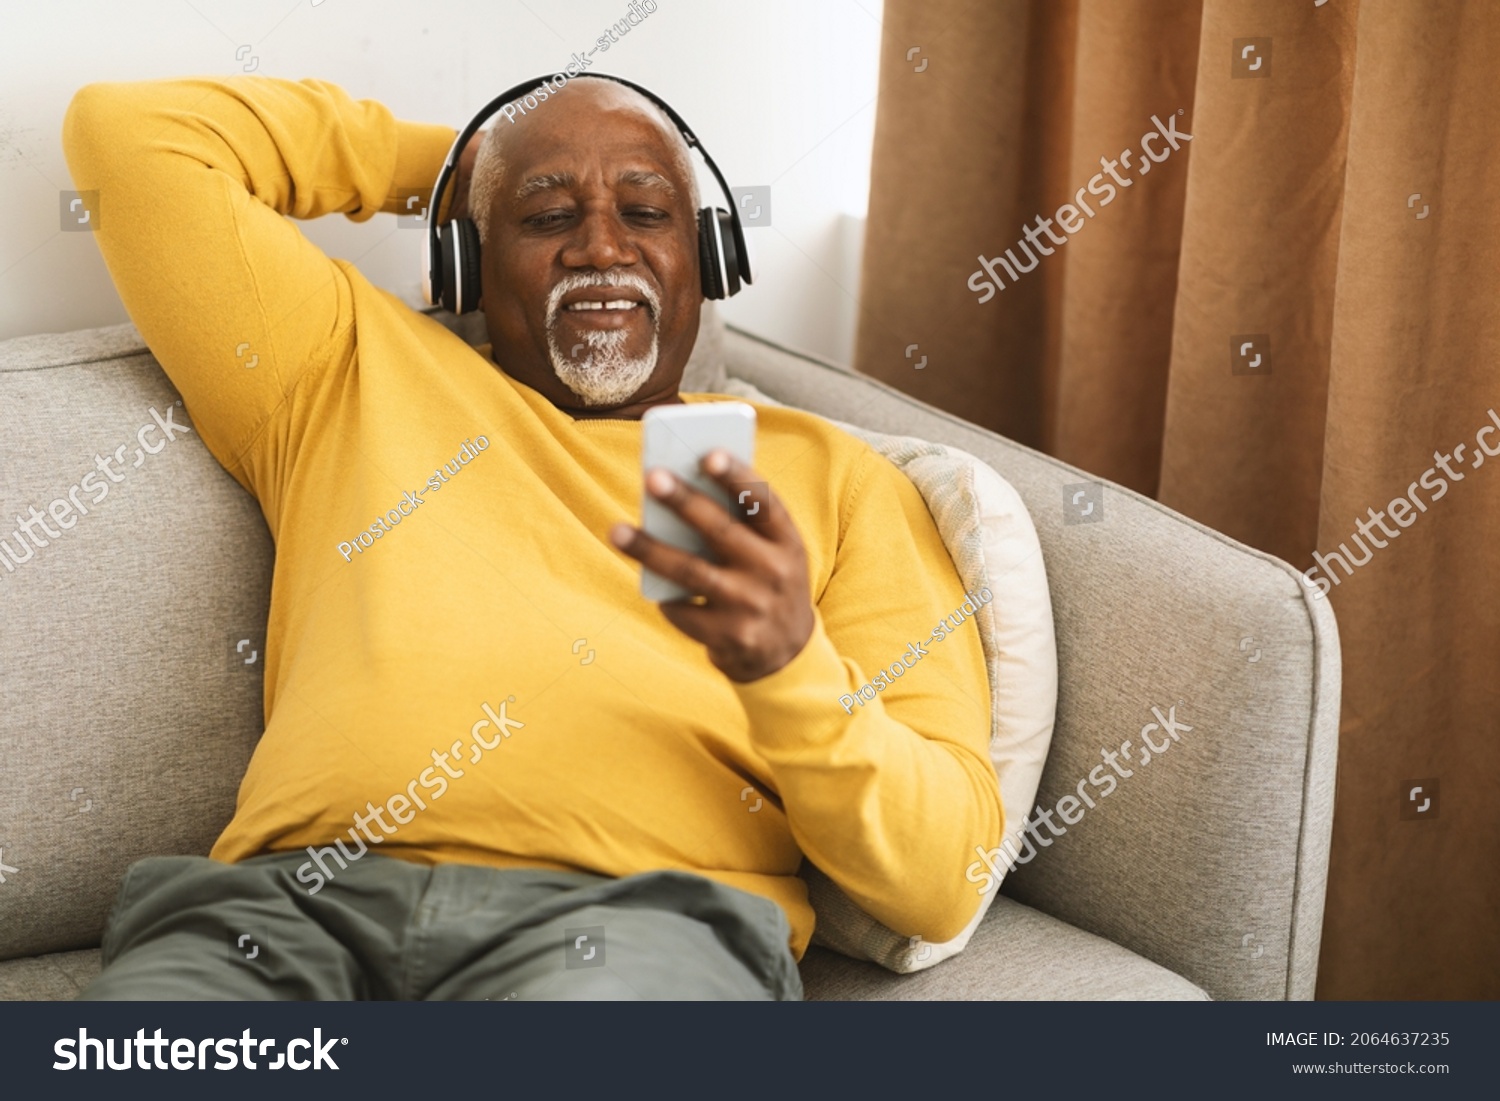 Senior African American Man Listening To Music On Smartphone Sitting On Couch At Home. Male Wearing Headphones Enjoying Favorite Song Or Audiobook On Weekend. People And Gadgets #2064637235